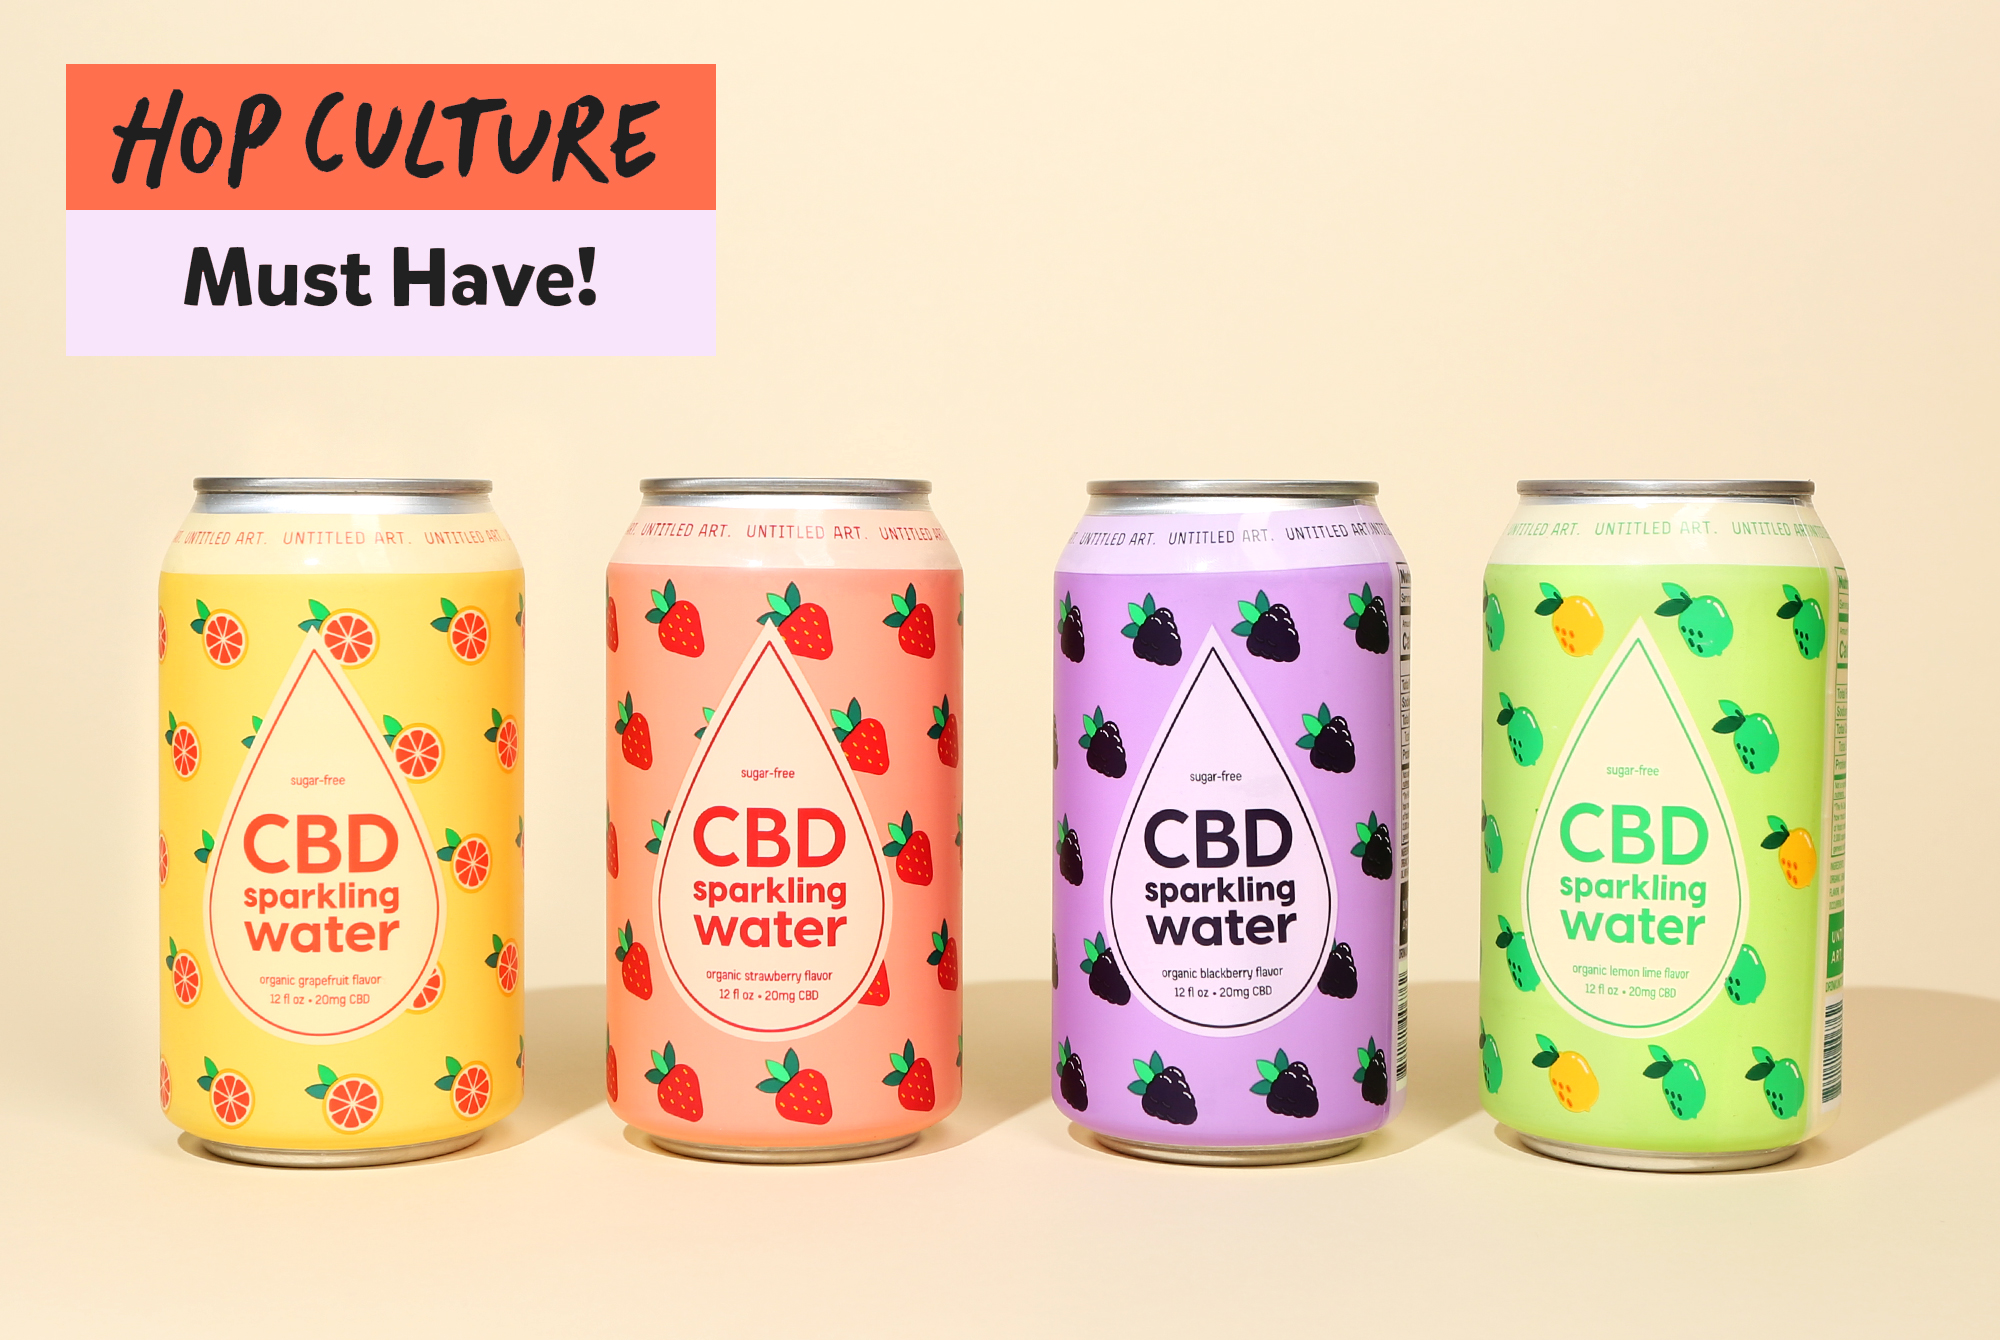 Untitled Art’s CBD Sparkling Water Will Cure What Ails You